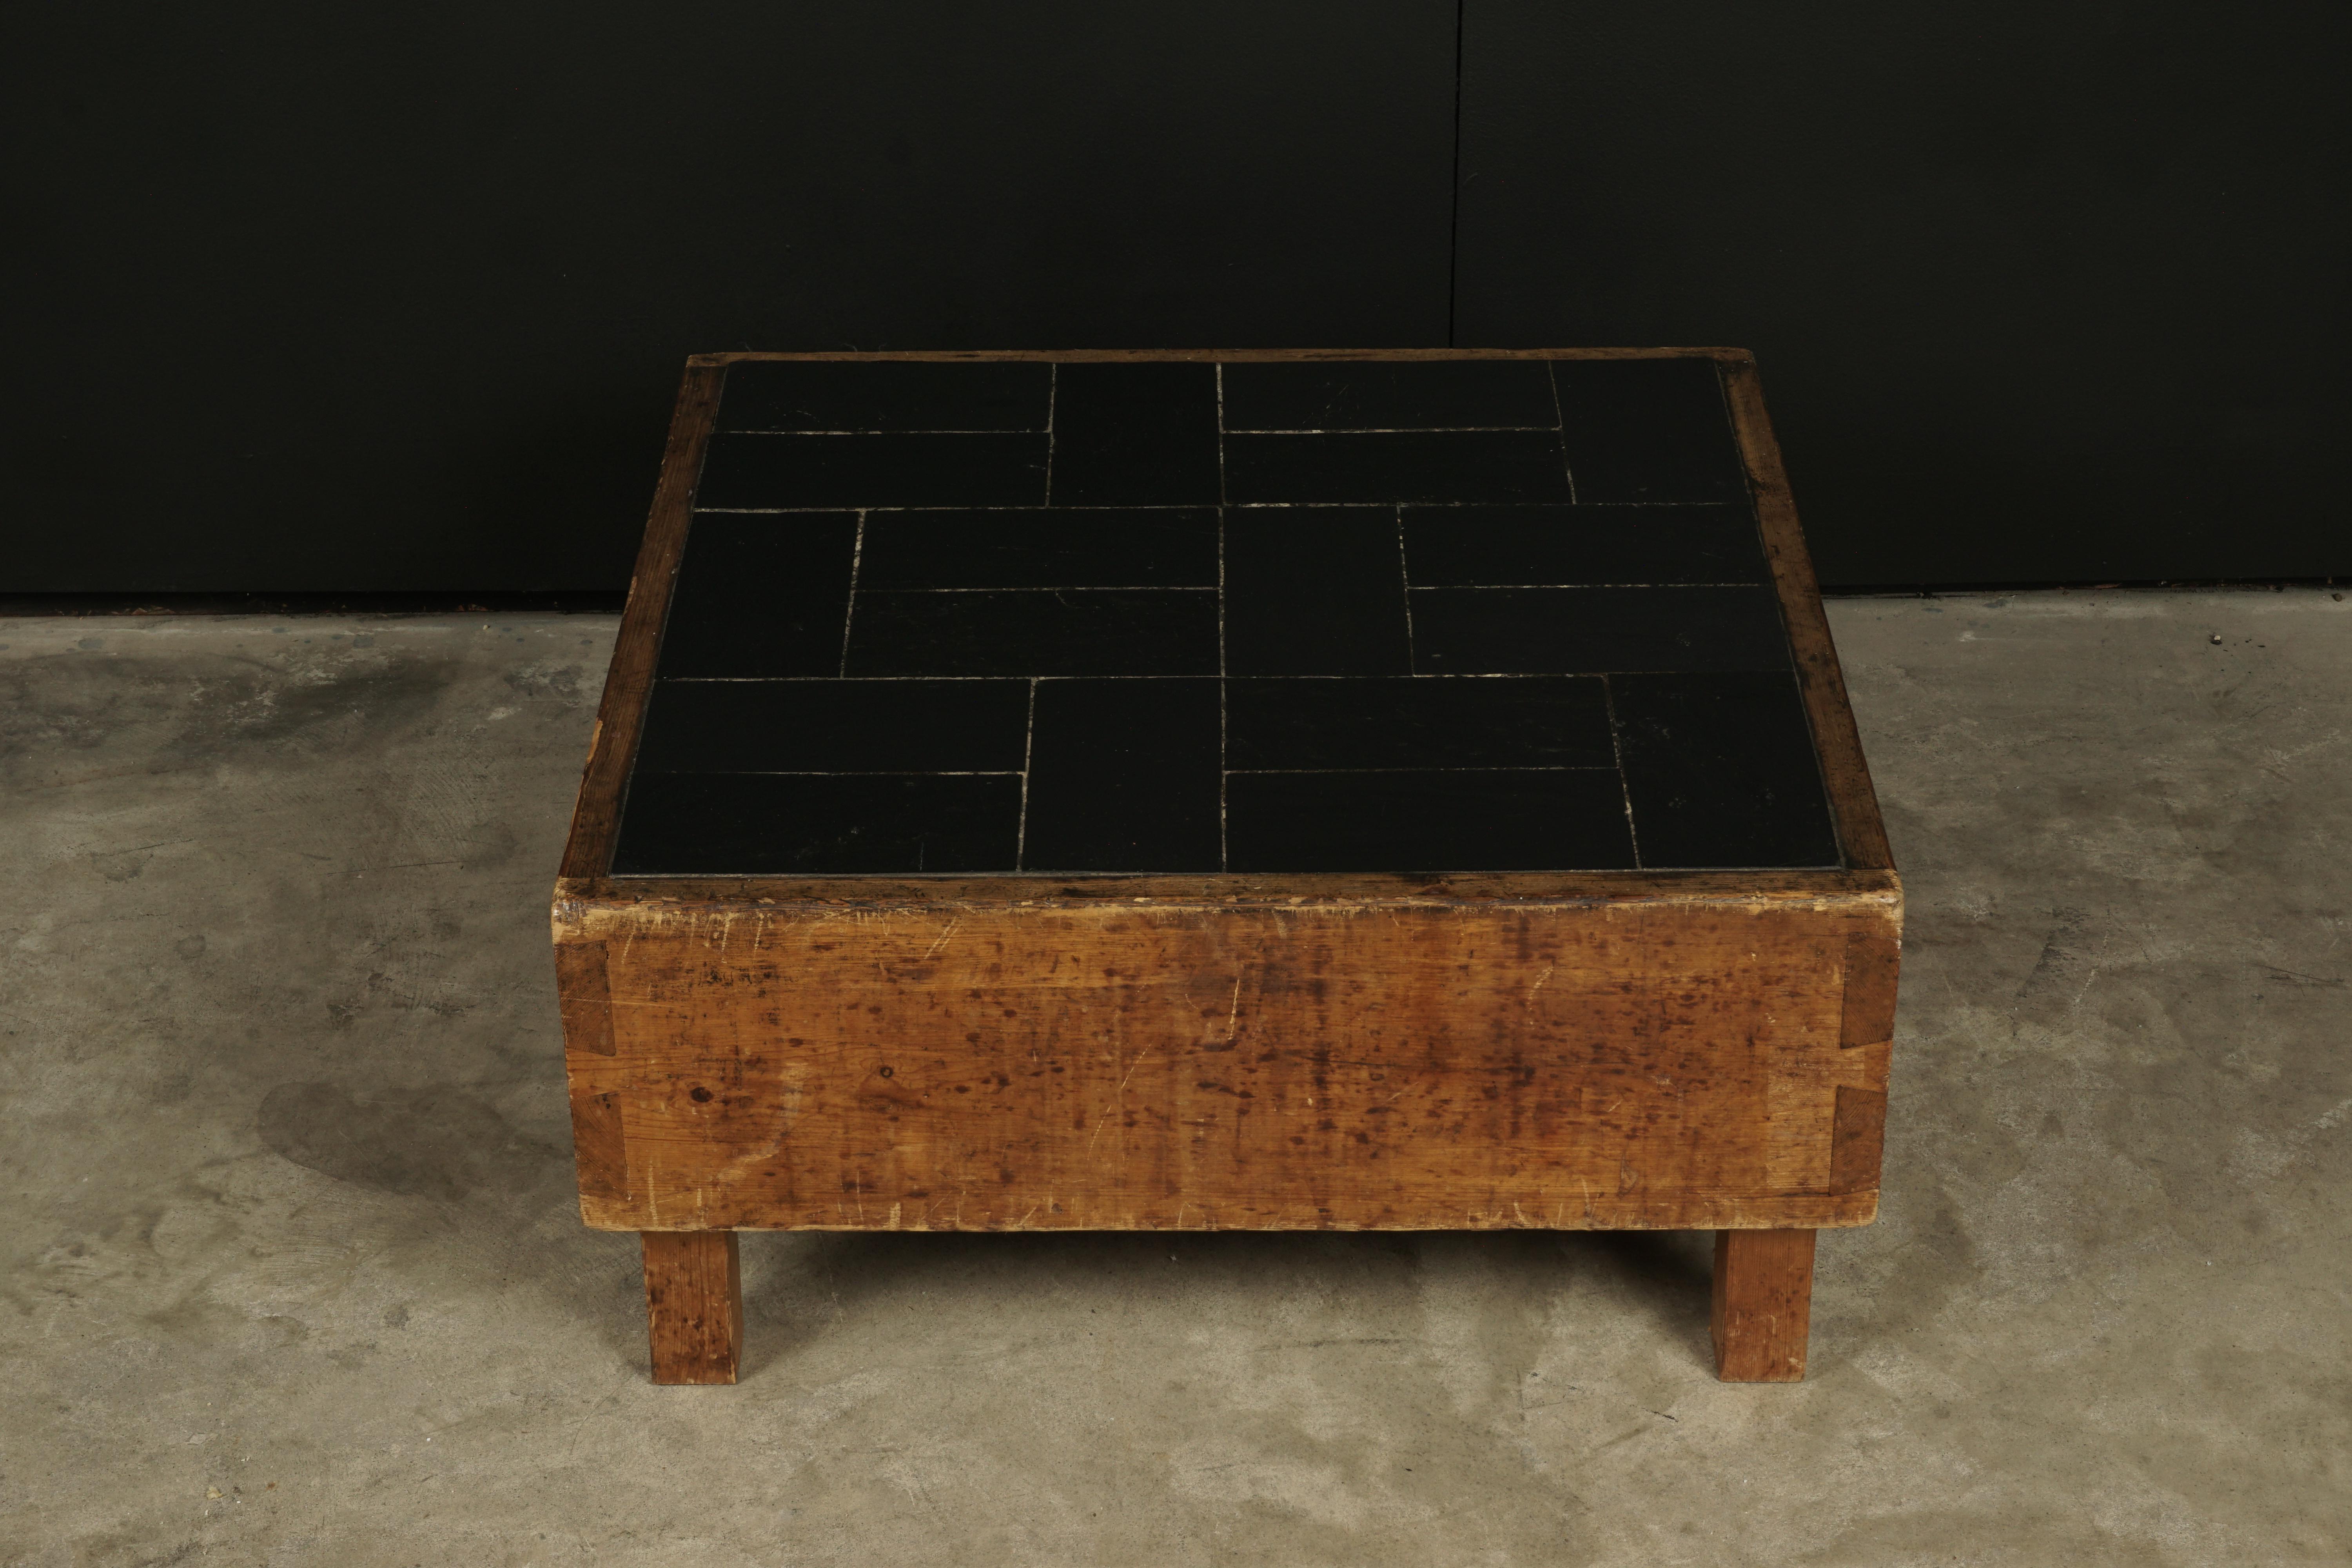 Rare pine coffee table from France, 1960s. Solid joined pine construction with slate tiles on the top. Very unusual model.